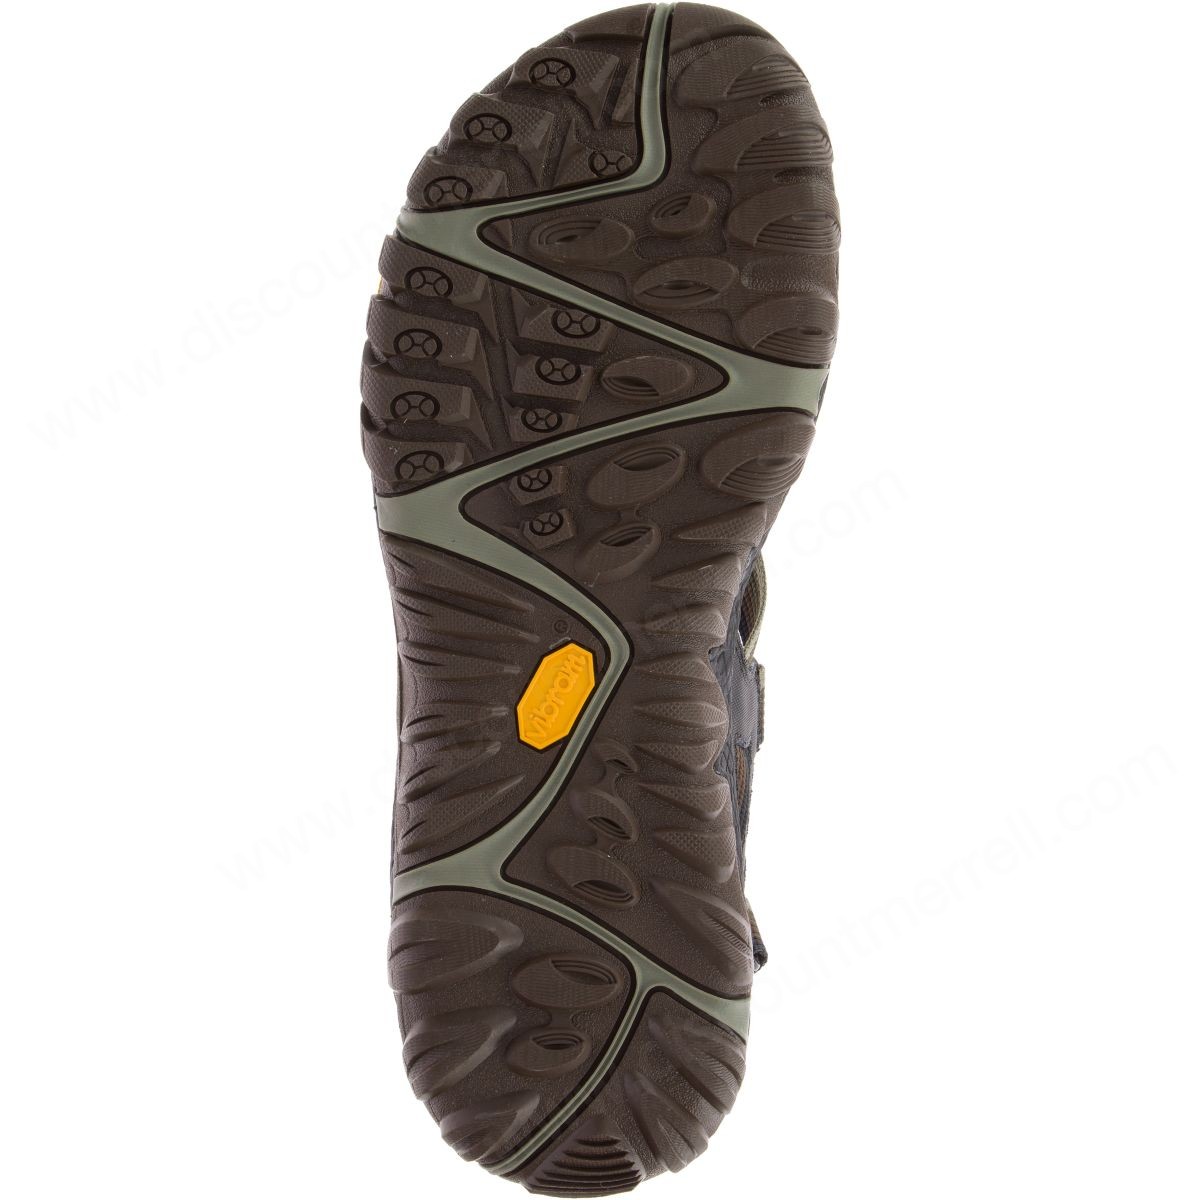 Merrell Man's All Out Blaze Web Dusty Olive - -1